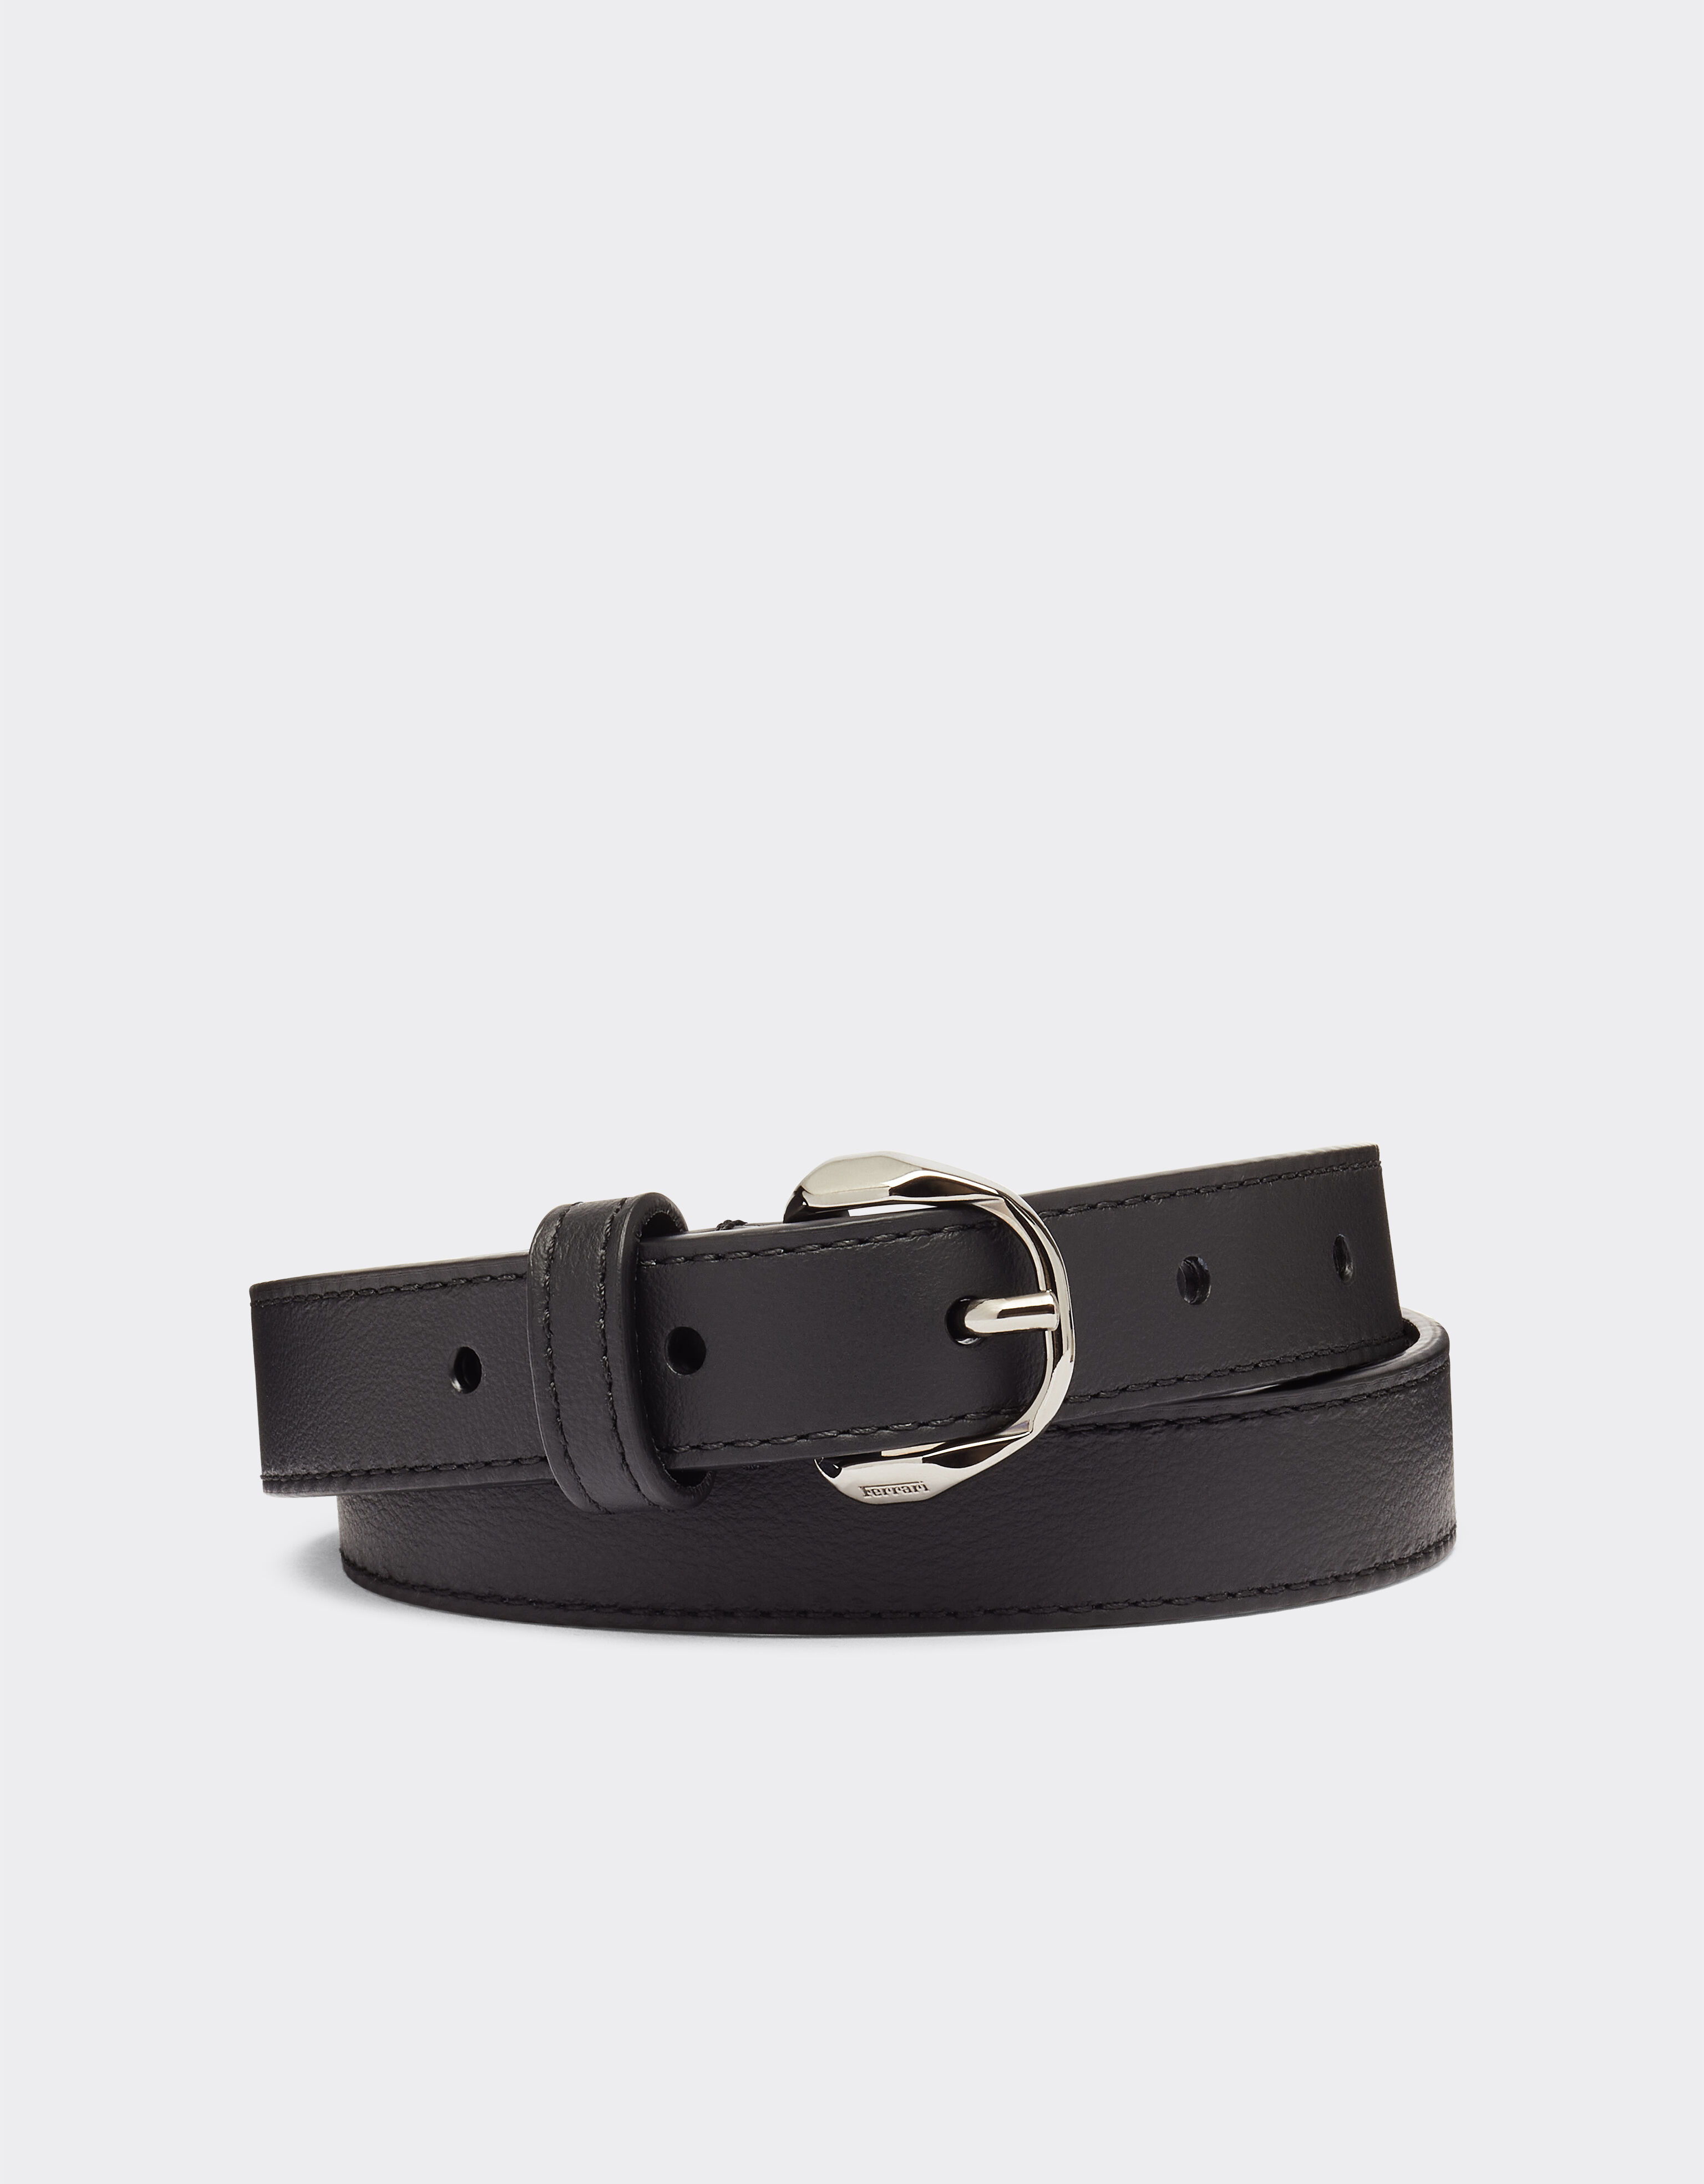 Ferrari Thin leather belt with Prancing Horse detail Total Black 20308f